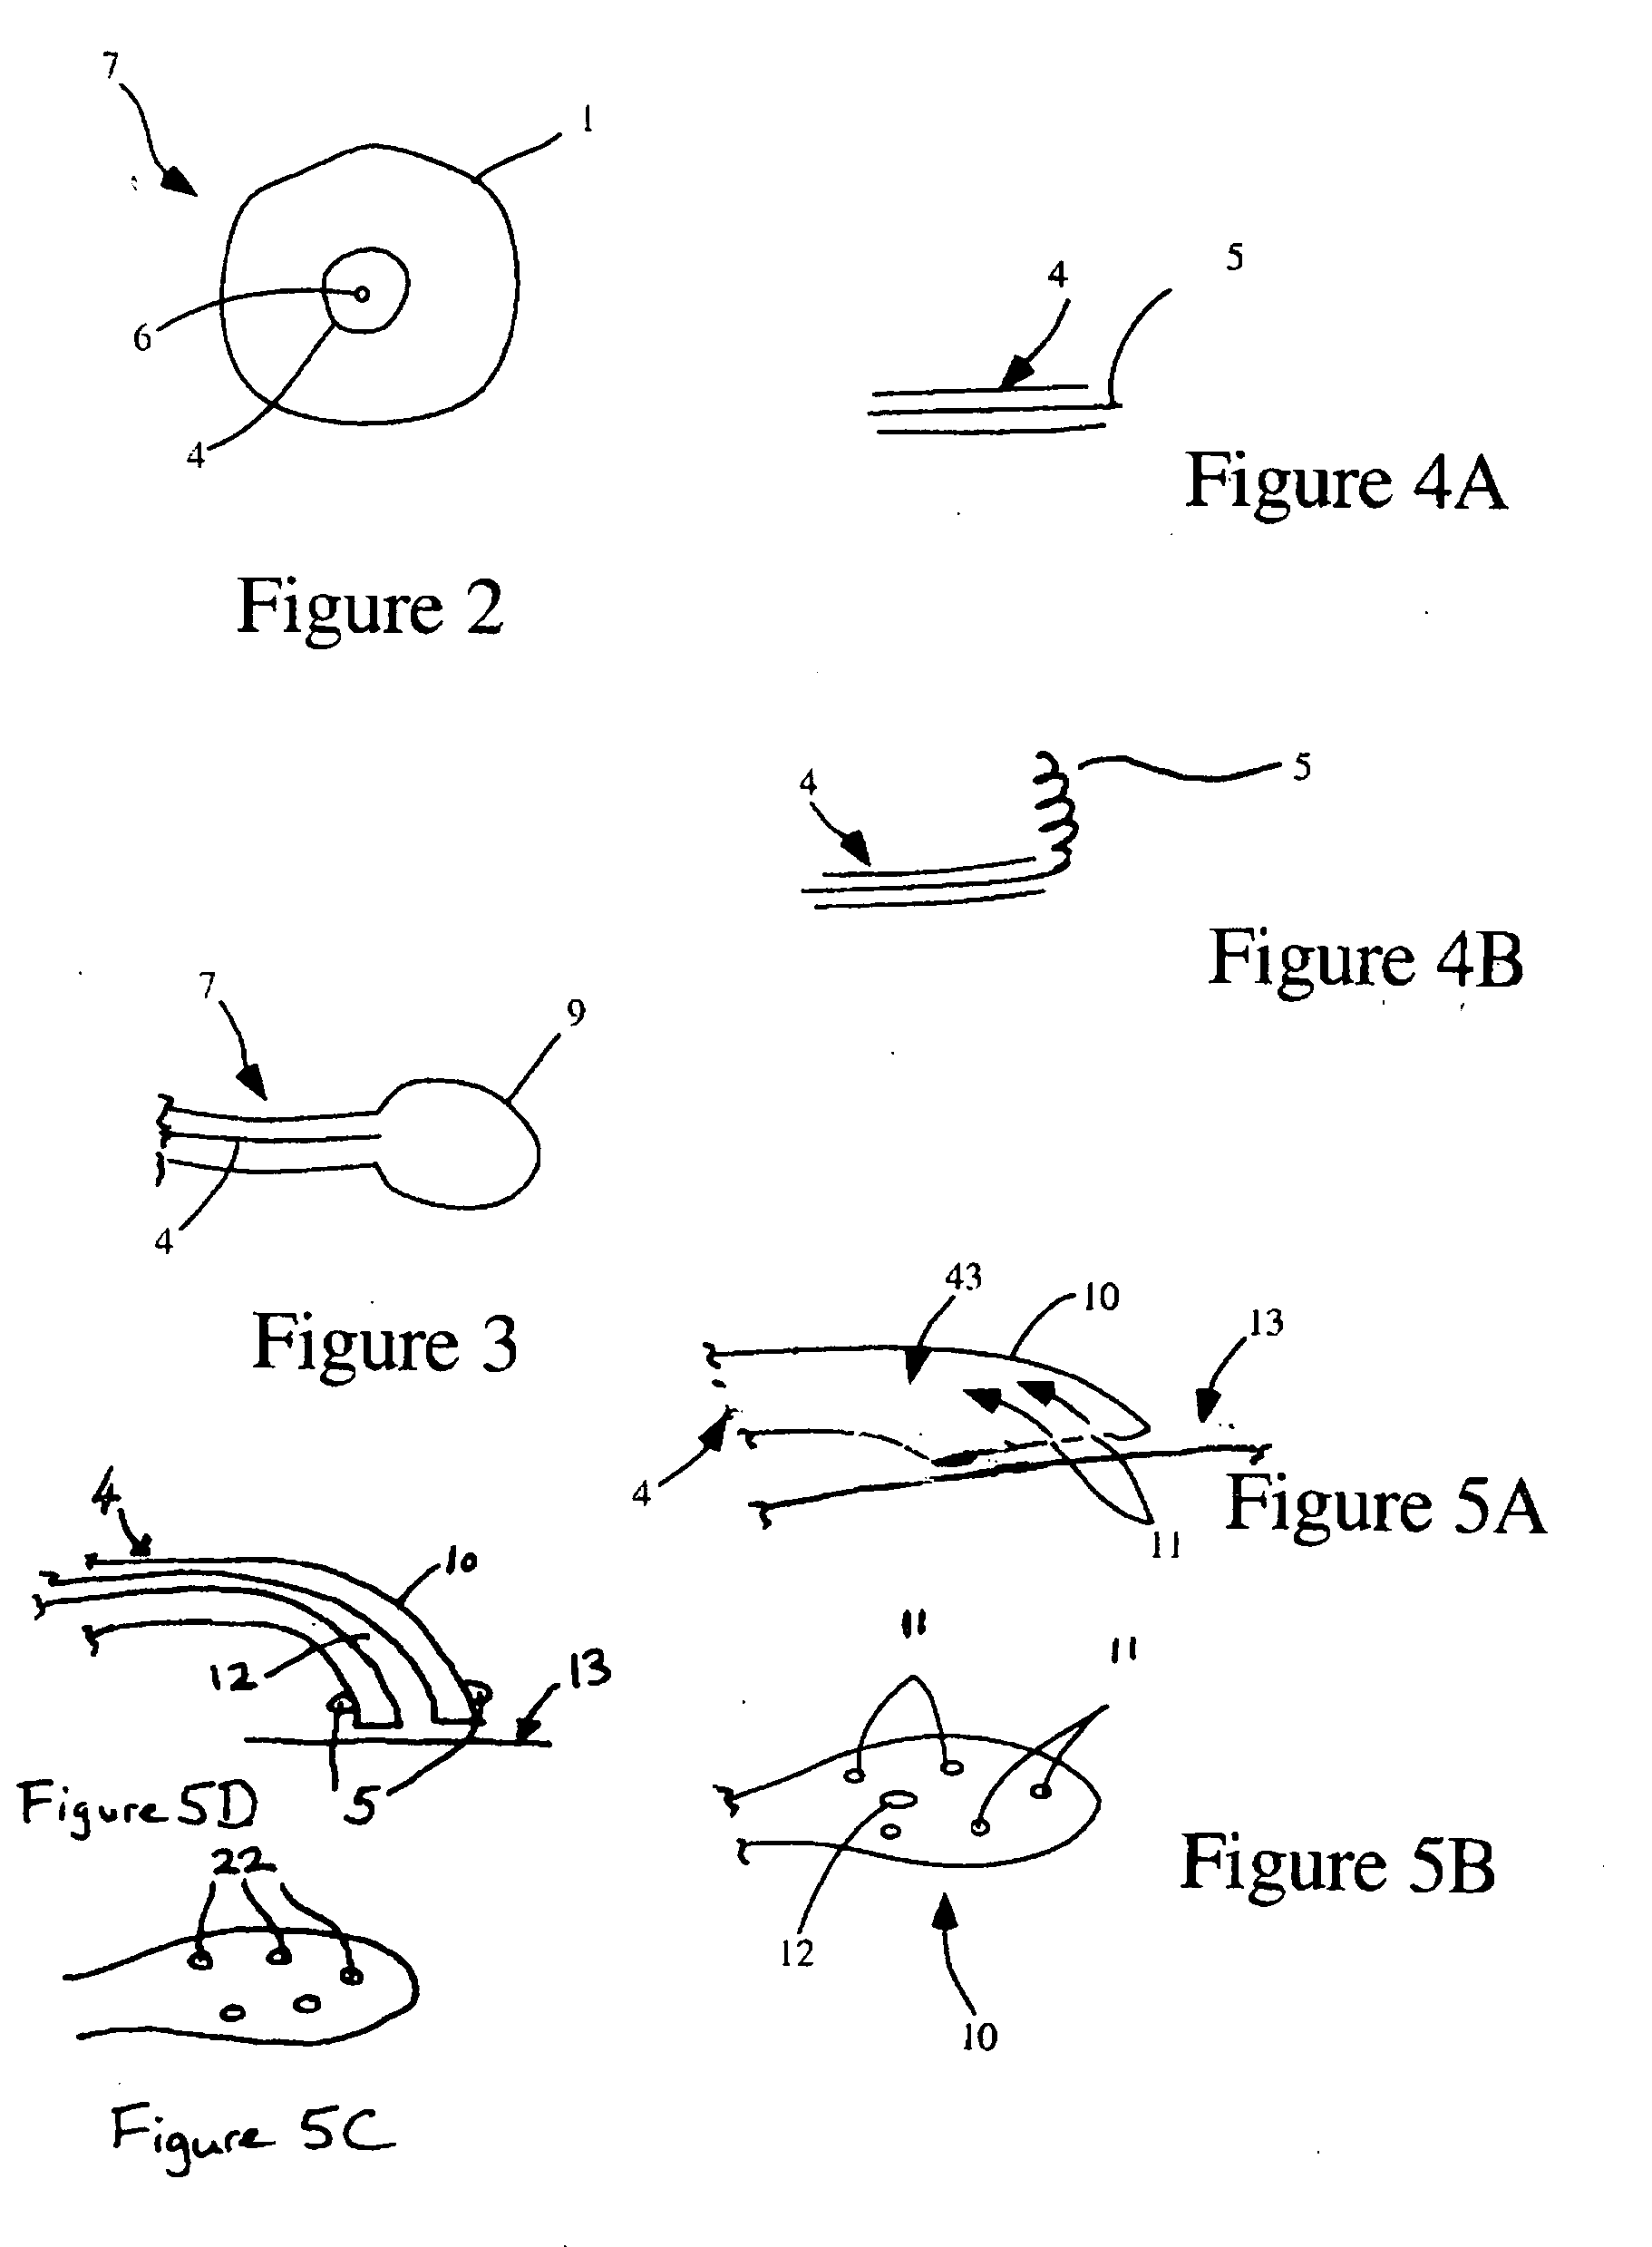 Devices and methods for treating cardiac pathologies